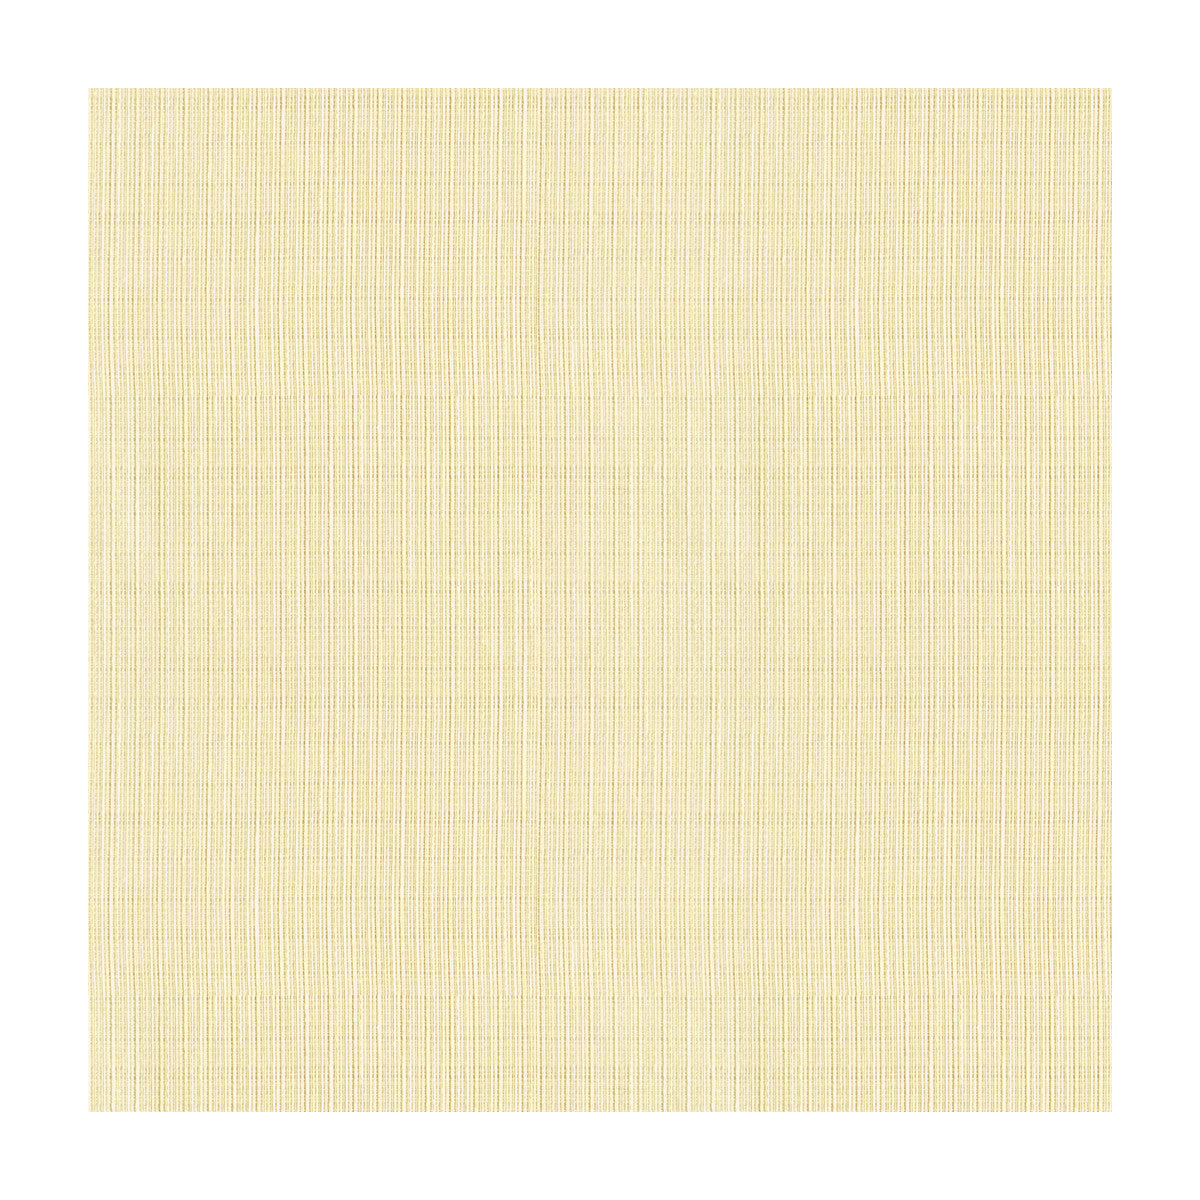 Kravet Contract fabric in 4158-1 color - pattern 4158.1.0 - by Kravet Contract